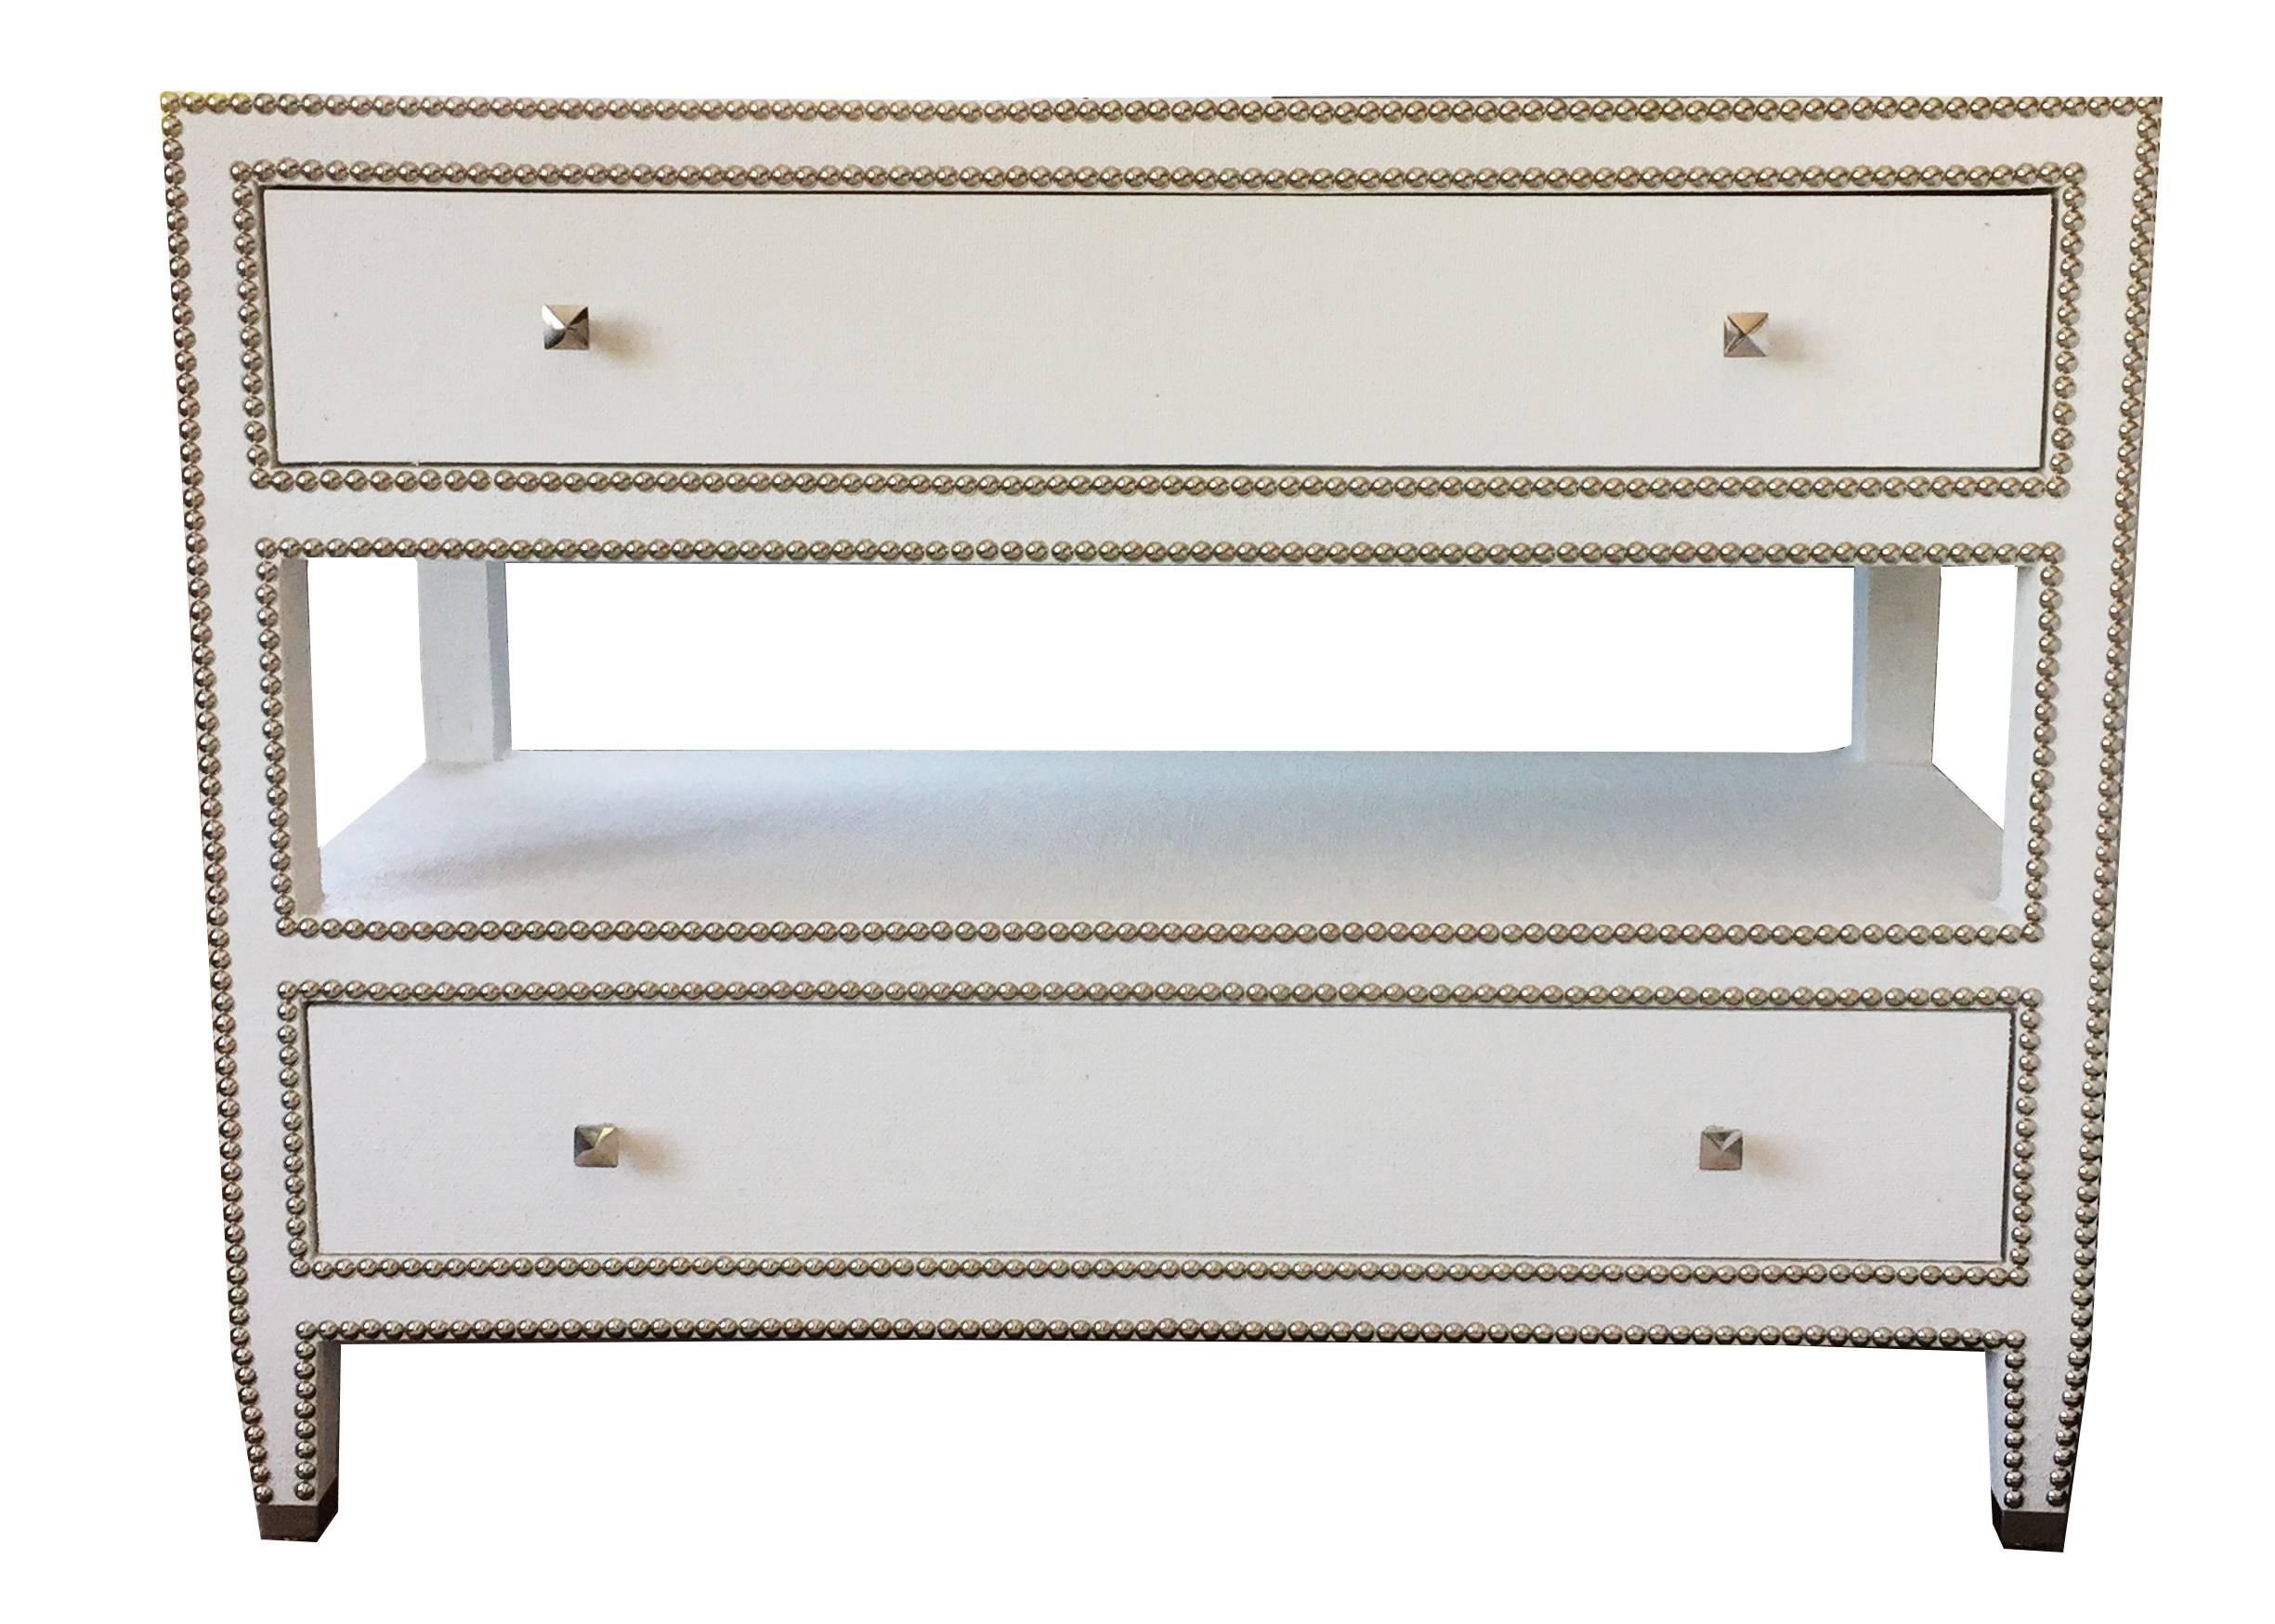 Our Bachelor's chest is upholstered in white burlap and features polished nickel knobs and polished nickel nail heads. Item can be customized. Made in our Connecticut workshop. 

Measurements:
38 3/4